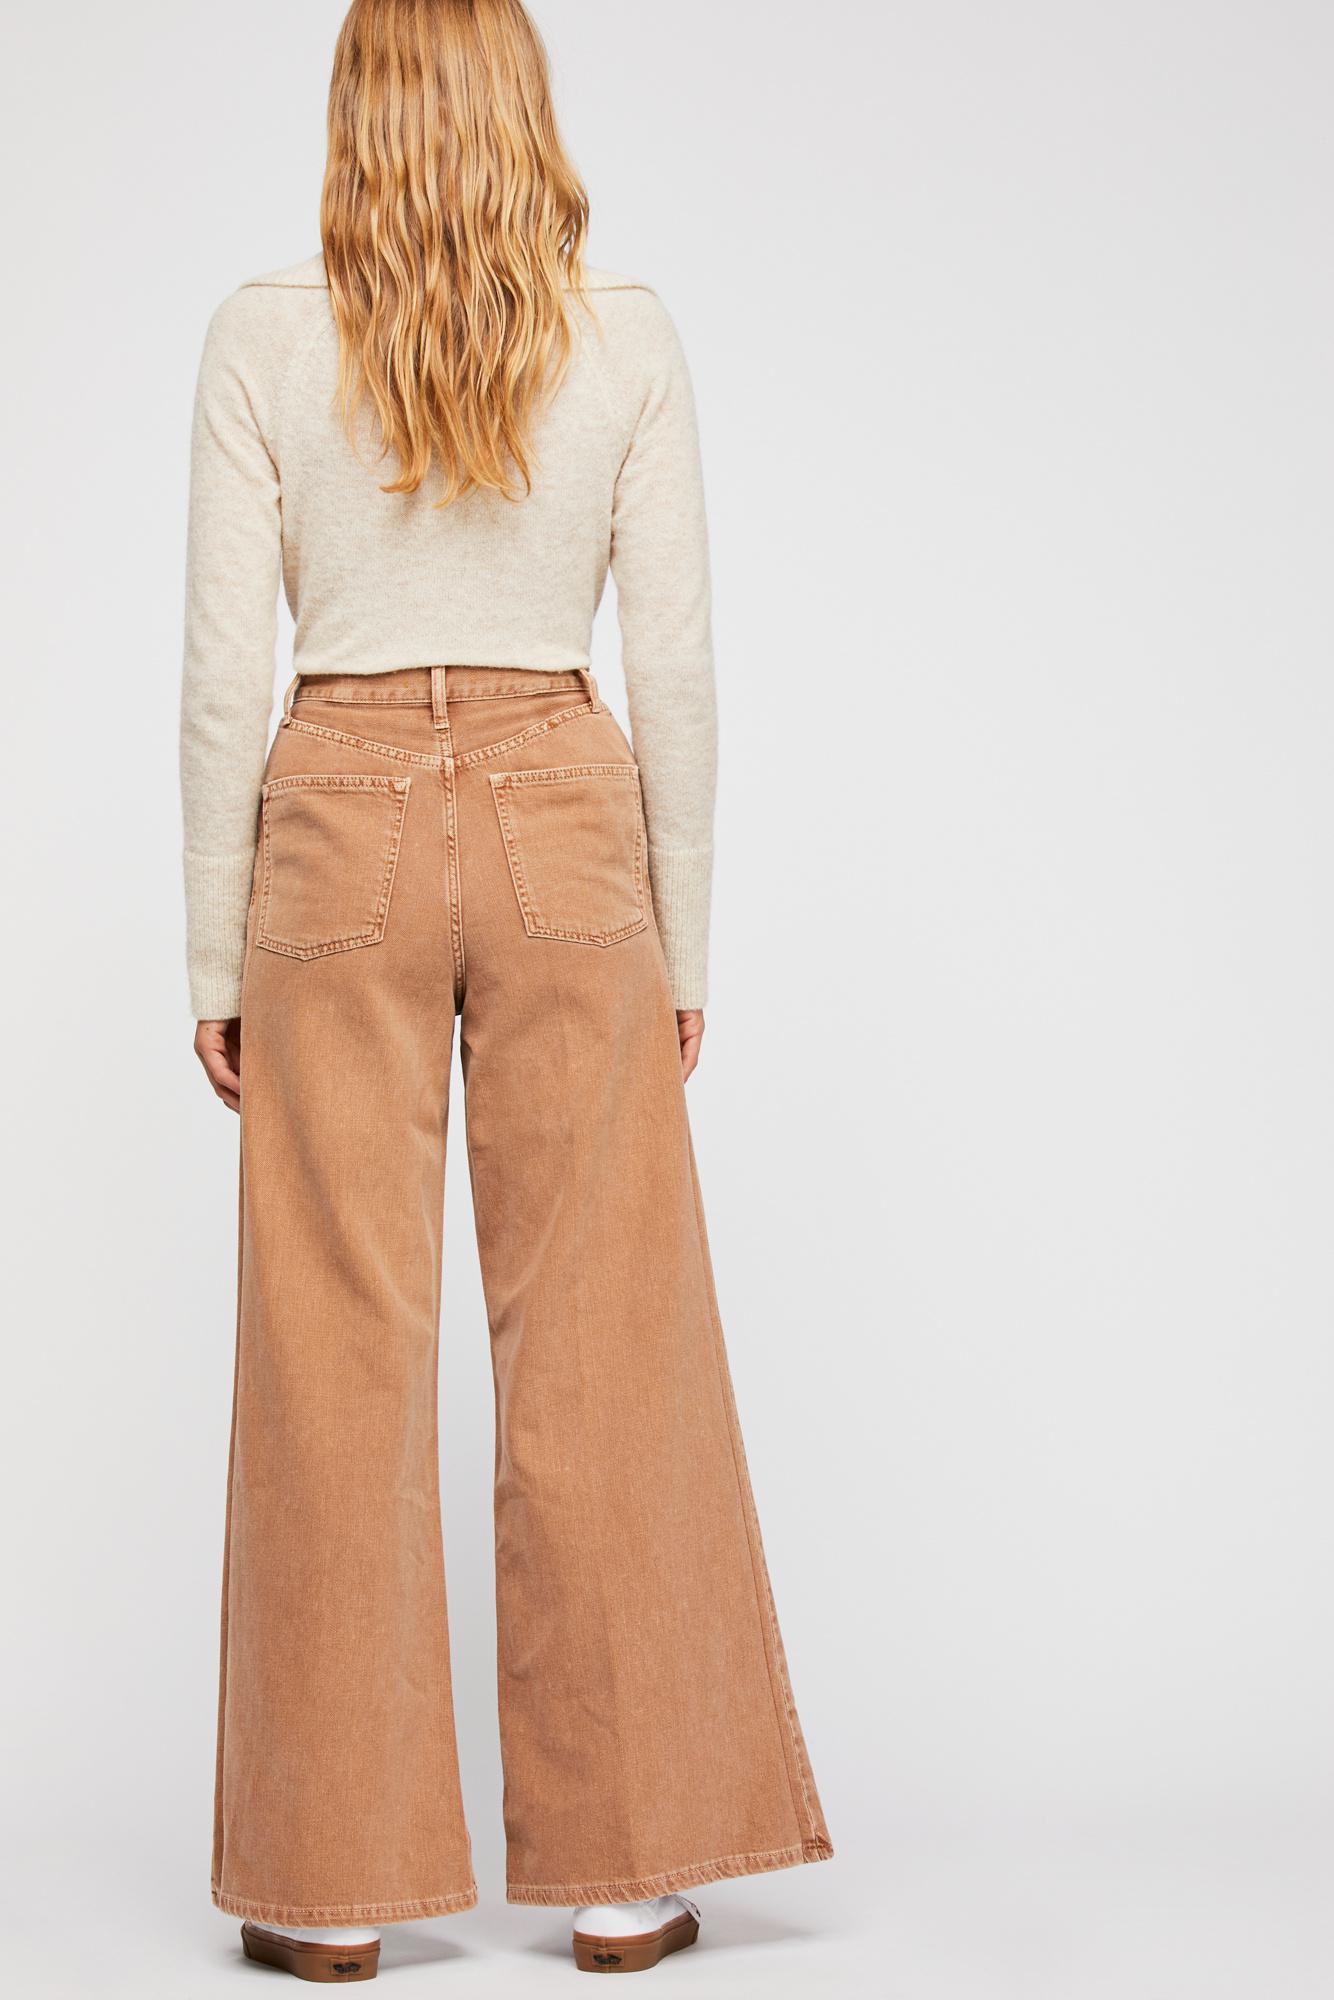 Free People Denim Super High-rise Wide-leg Jeans in Brown - Lyst